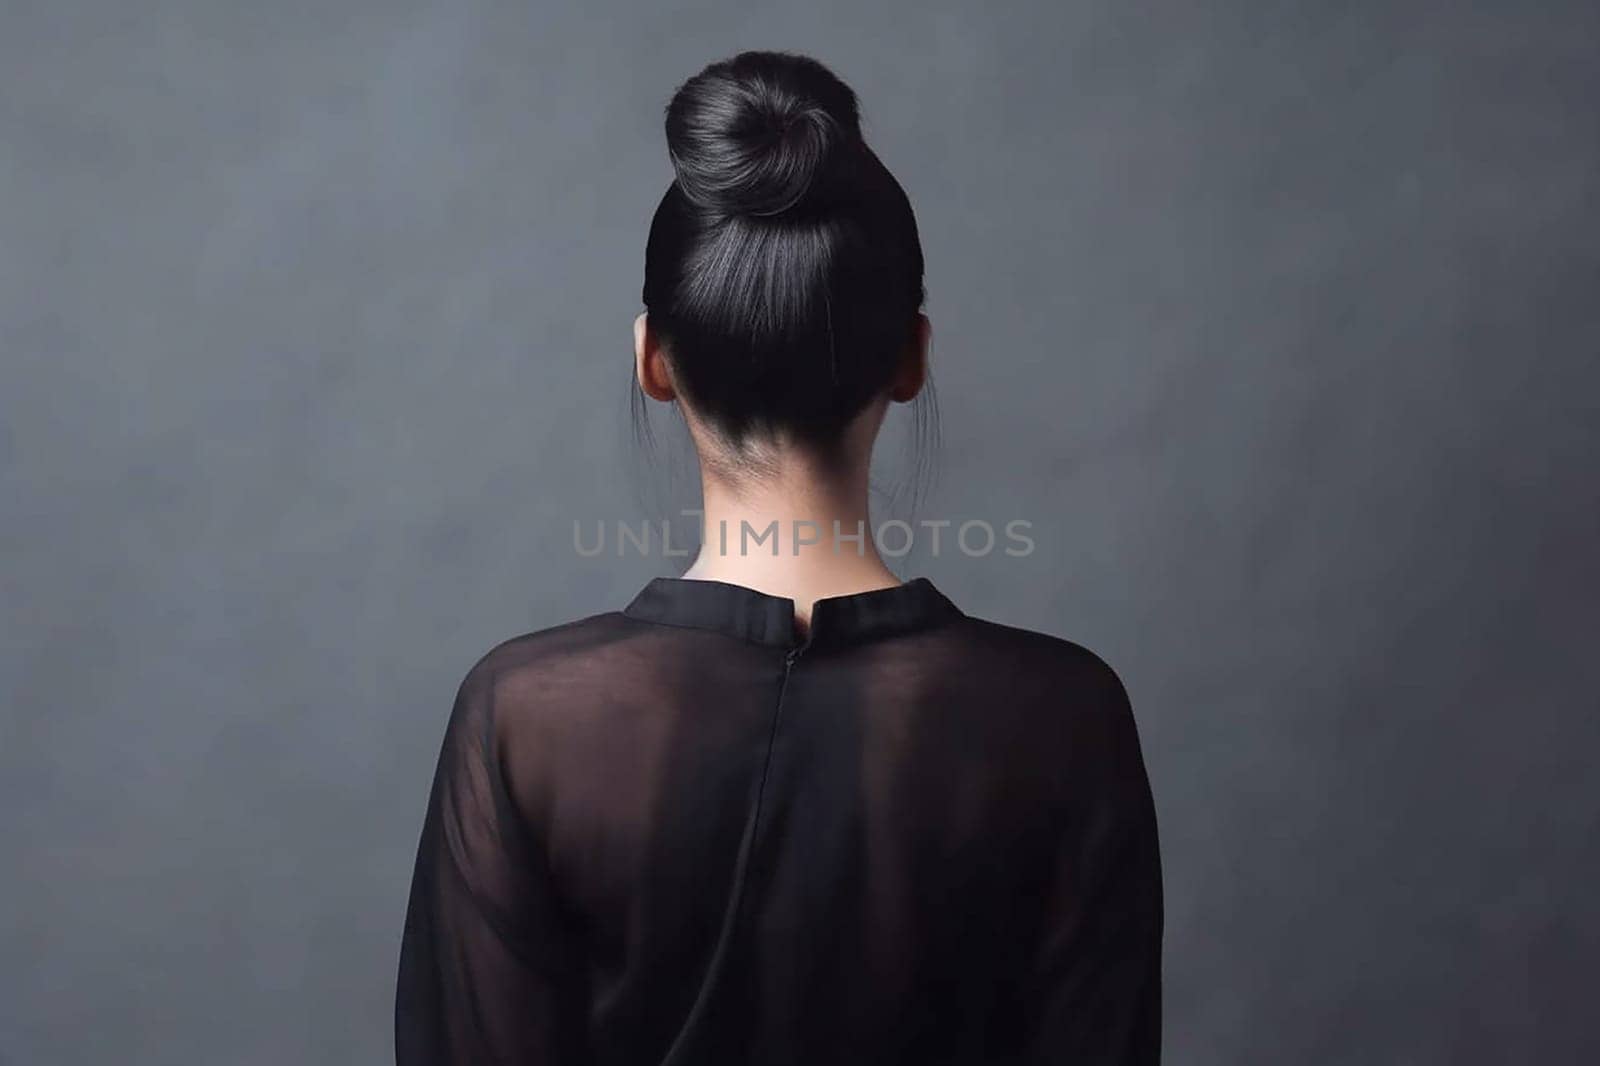 Woman seen from behind with a bun hairstyle and black sheer top.